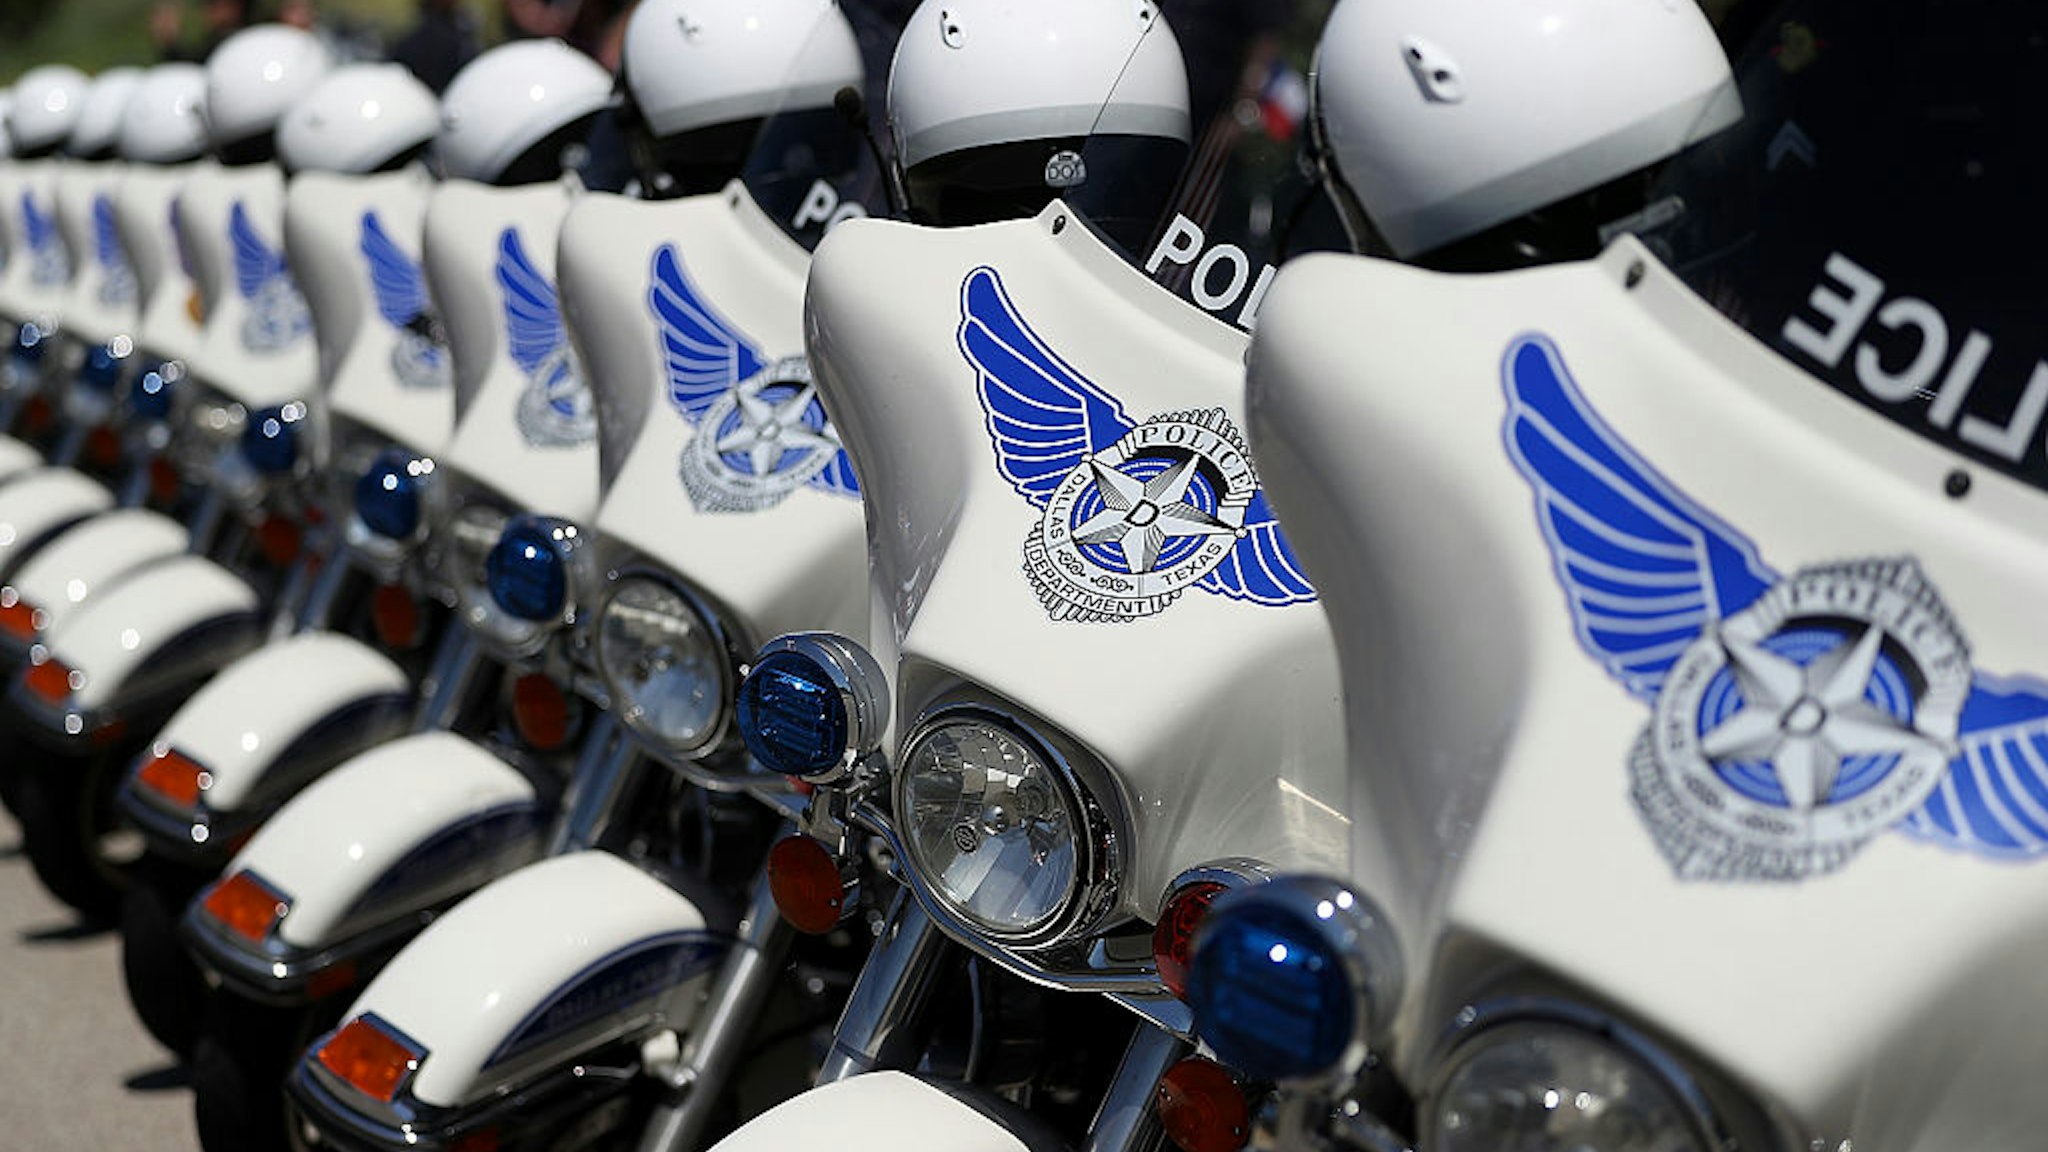 DALLAS, TX - JULY 14: Dallas police motorcycles line up outside of the funeral for slain Dallas police Sgt. Michael Smith at The Watermark Church on July 14, 2016 in Dallas, Texas. Dallas police Sgt. Michael Thomas was one of five Dallas police officers who were shot and killed by a sniper during a Black Lives Matter march in Dallas. (Photo by Justin Sullivan/Getty Images)